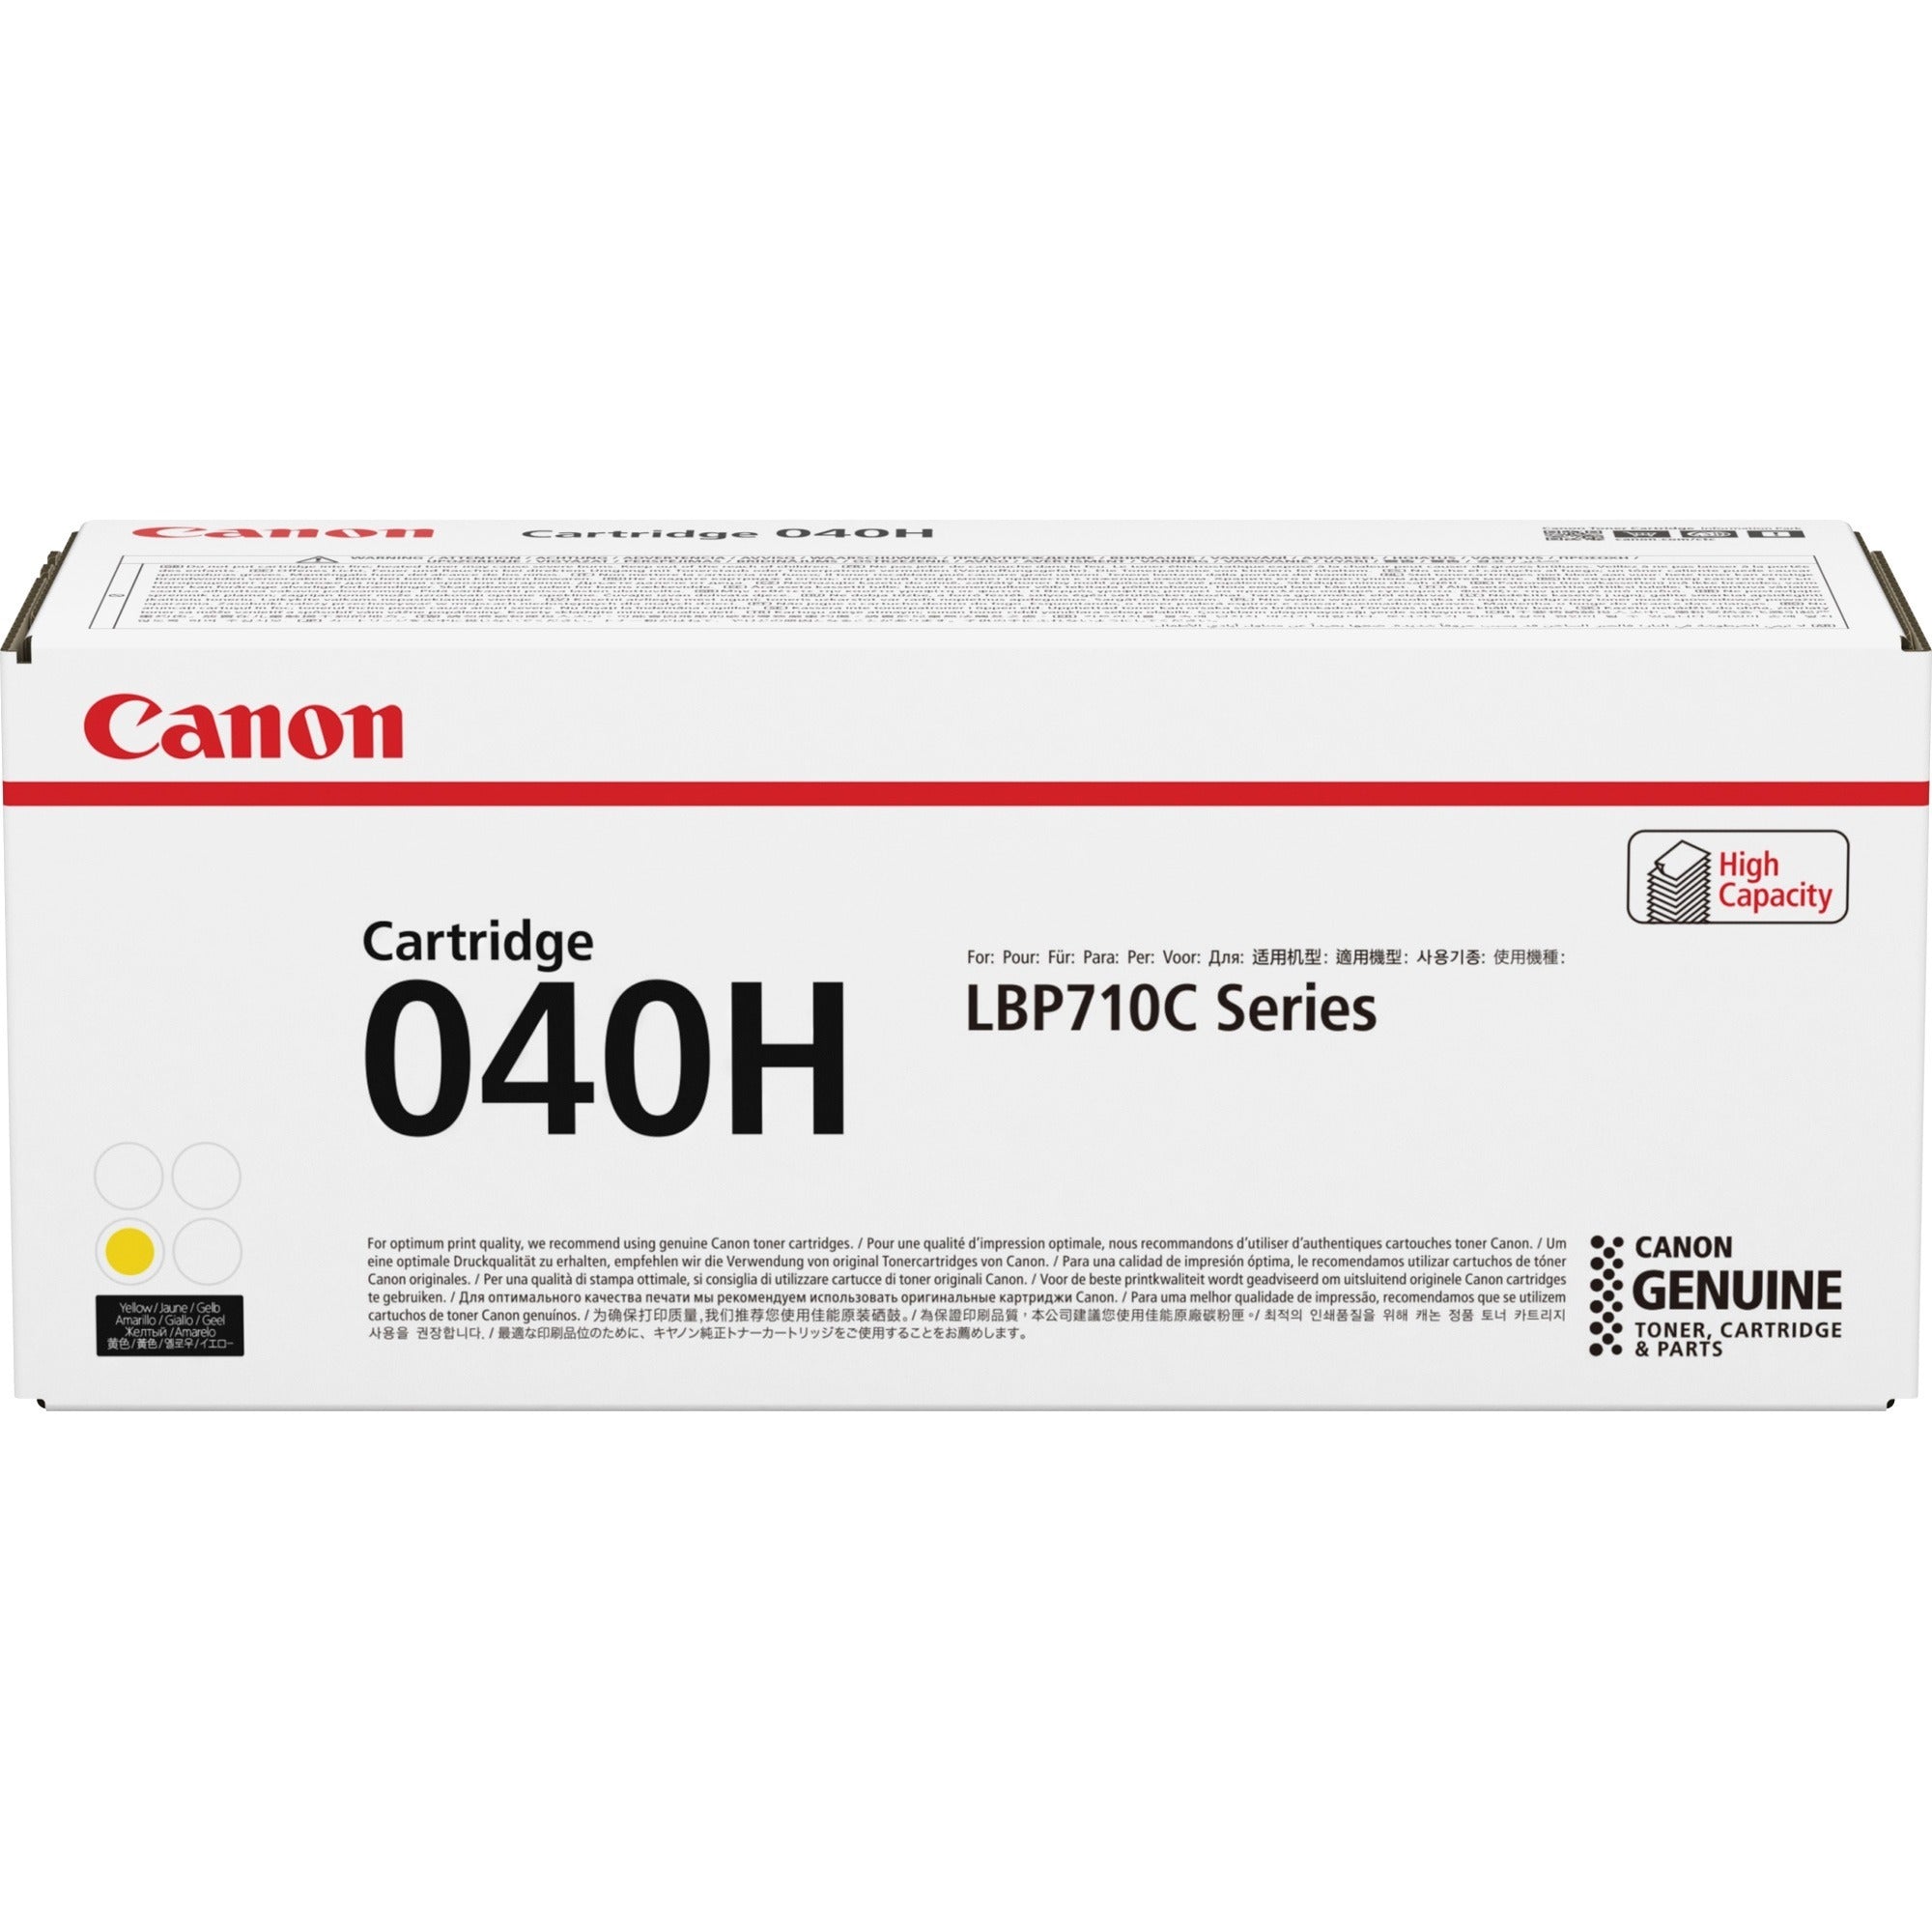 canon-toner-cartridge-laser-high-yield-10000-pages-yellow-1-each_cnmcrtdg040hy - 1